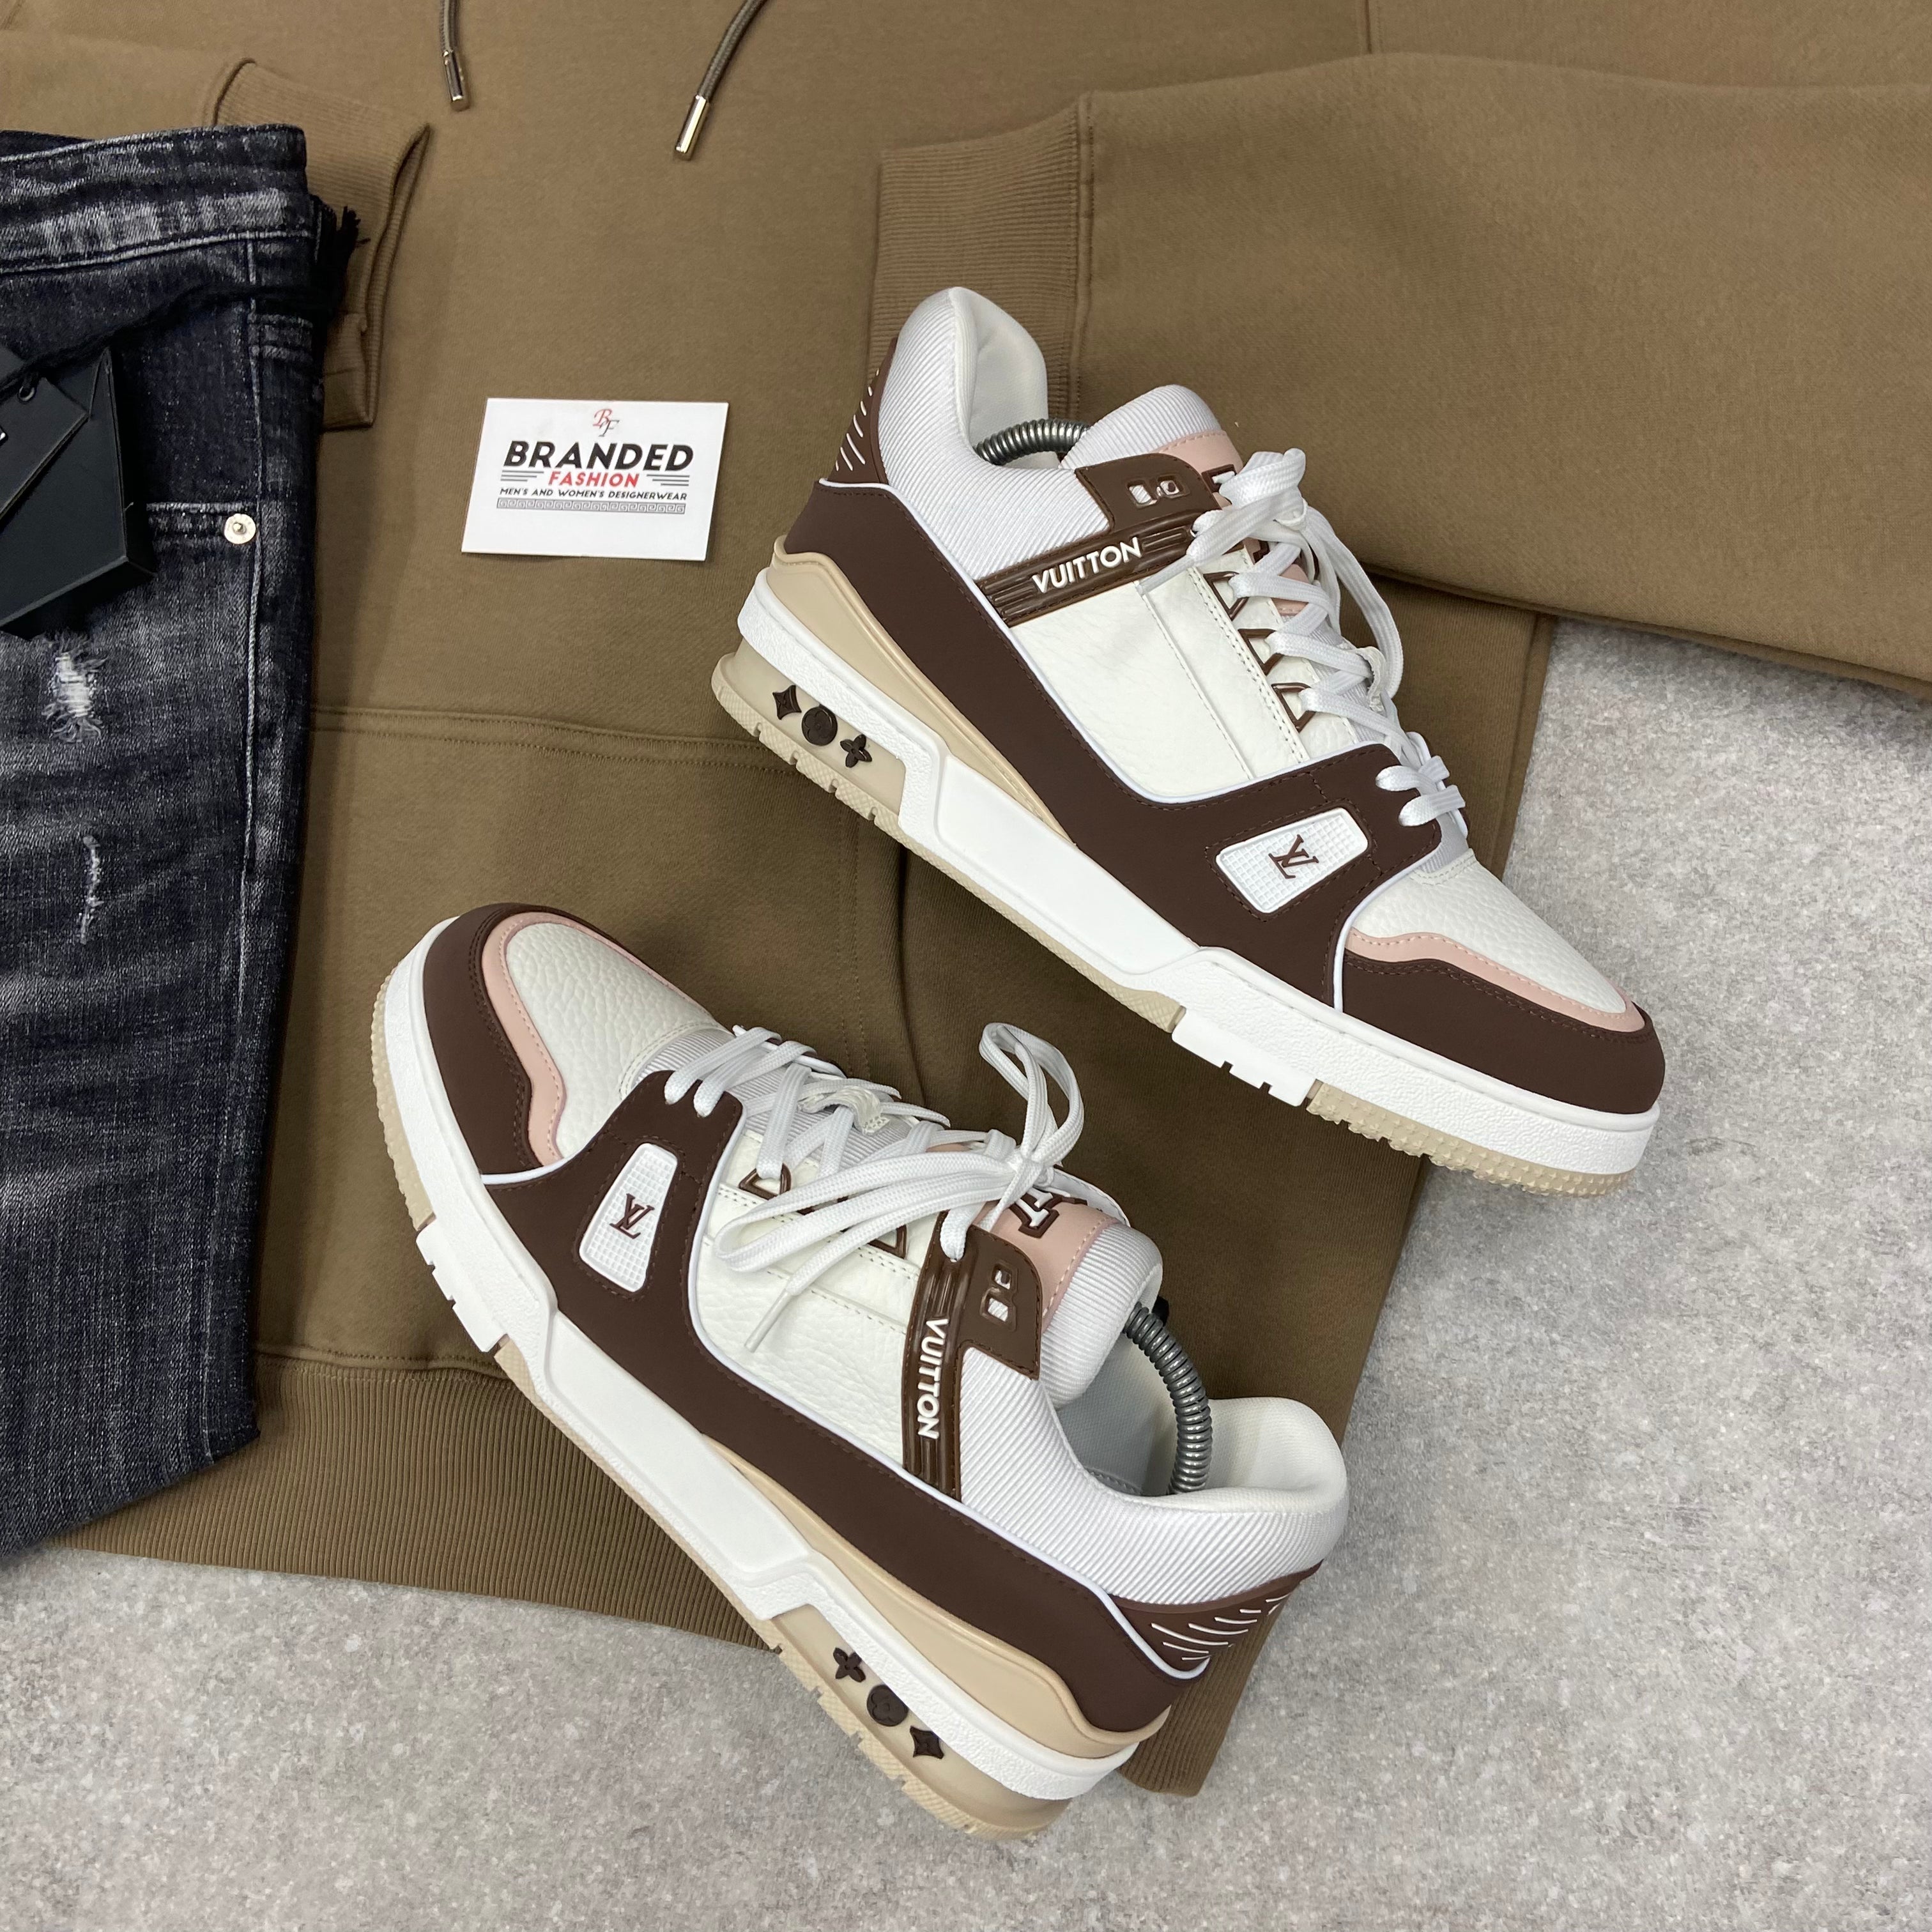 LOUIS VUITTON - TRAINERS - BROWN/WHITE